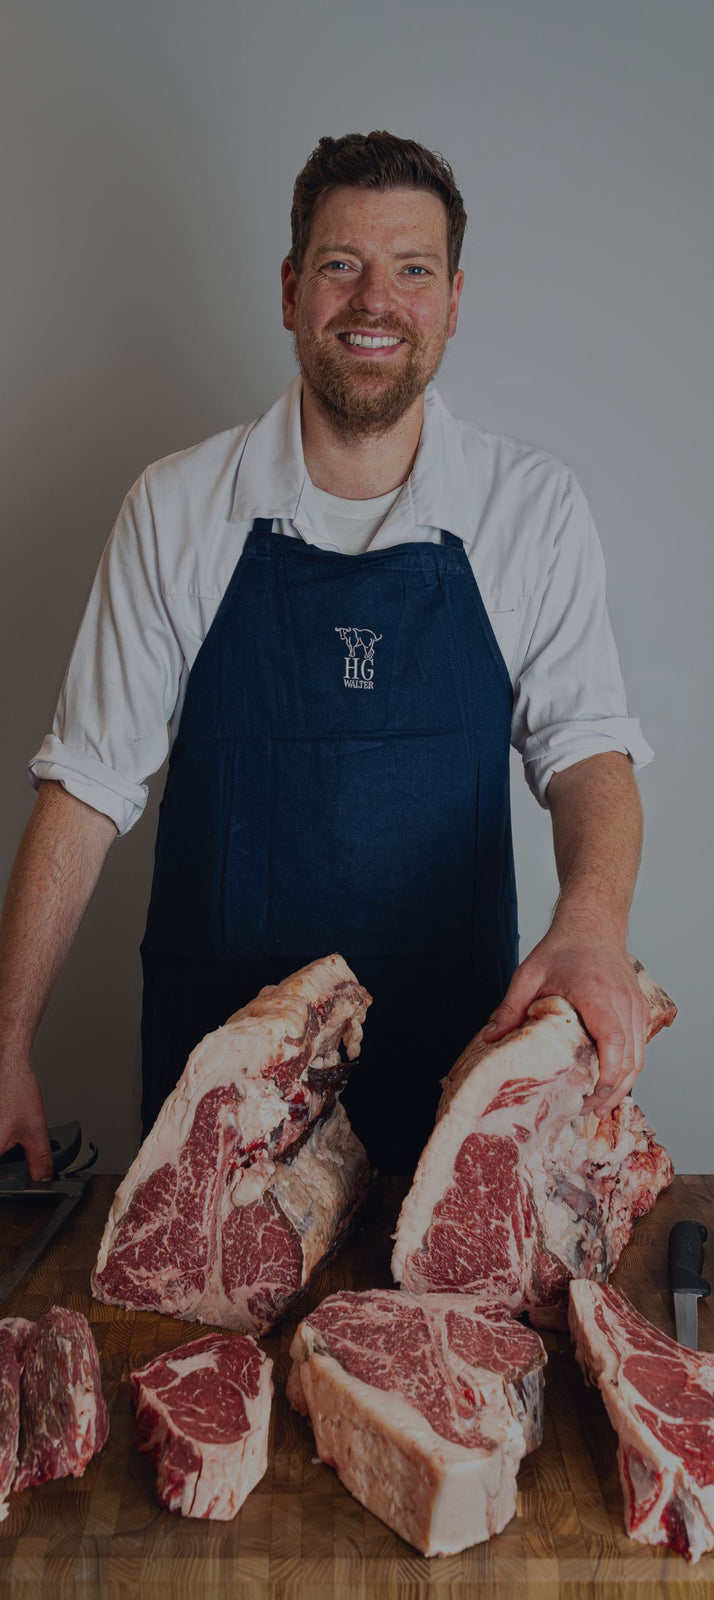 Sign up to hear butchery class updates